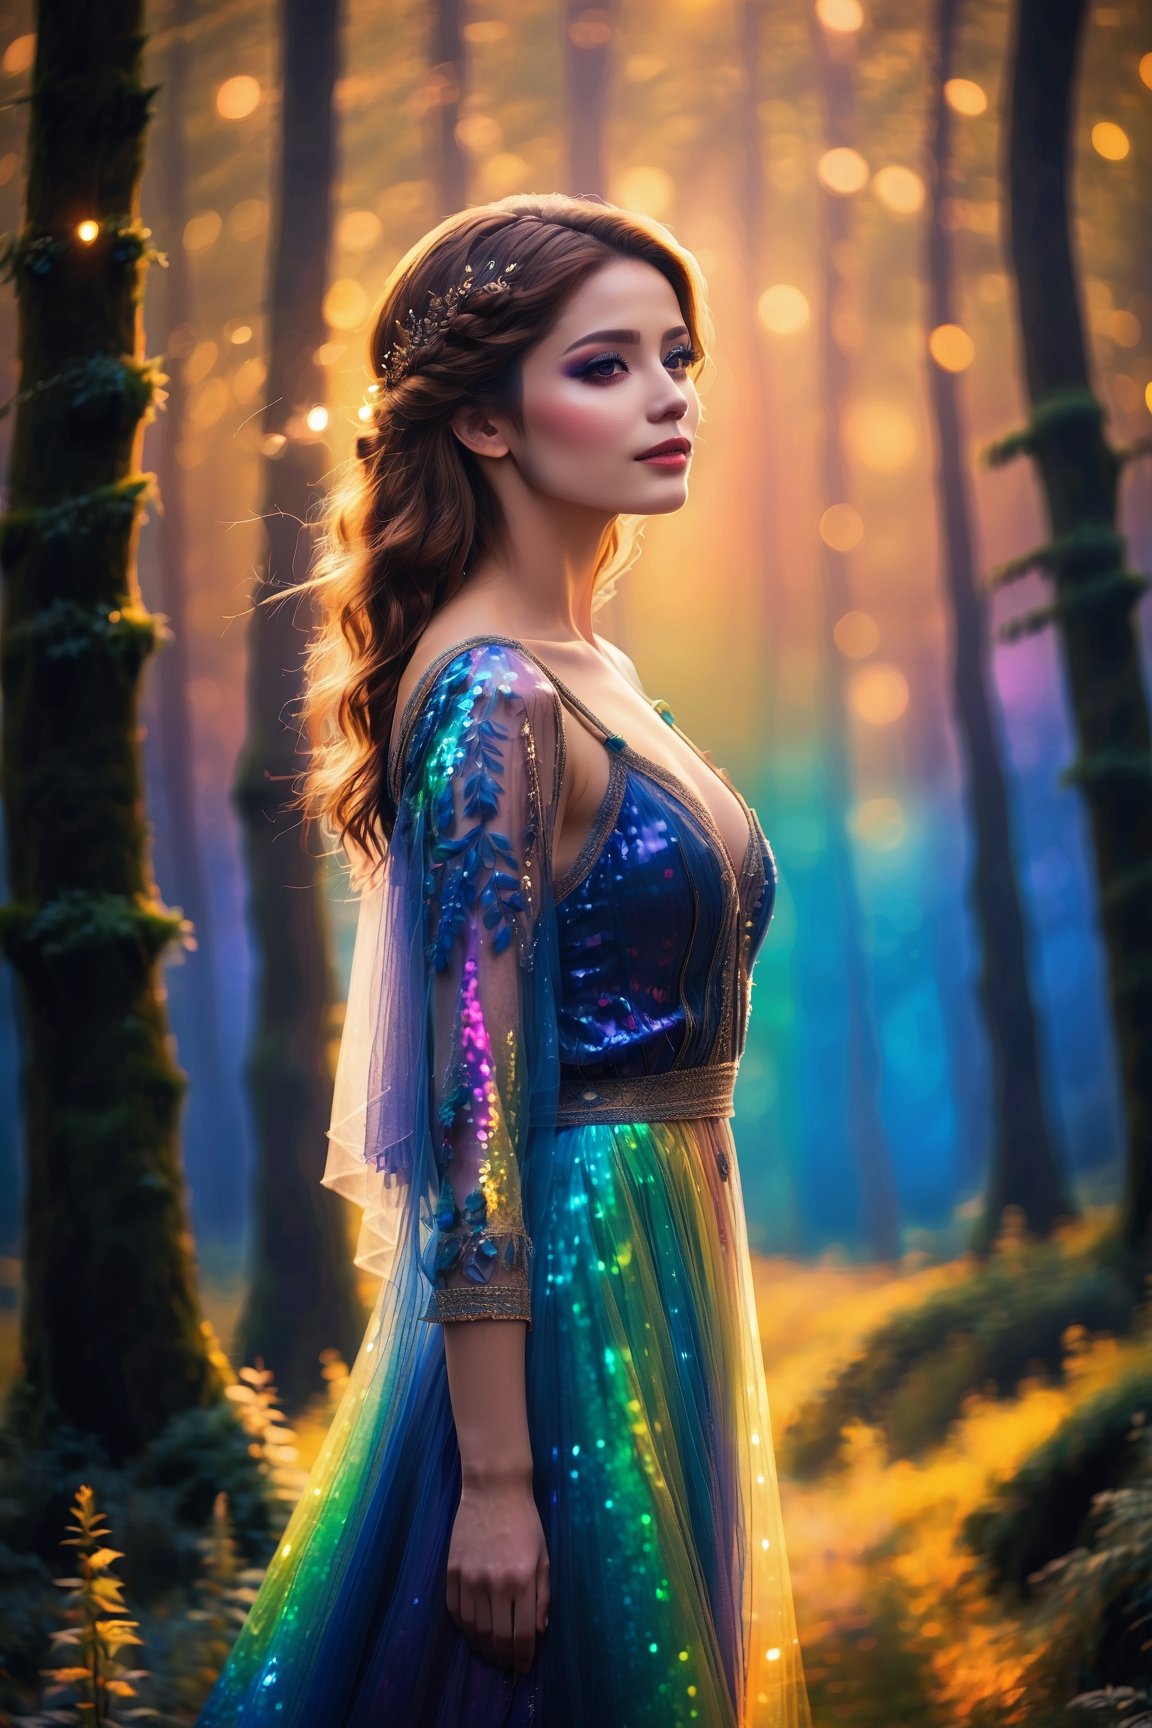 Masterpiece image of a beautiful girl with shoulder-length angled bluntends hairstyle, divine proportion, non-douche smile, aurora borealis, night scene, Glowing Whisper, Ethereal dance, Nocturnal Grace, Silent Luminescence, Midnight Flutter, Whispering Silent, Iridescent Encounter, Moonlit Shadow, by Skyrn99, full body, (((rule of thirds))), high quality, high detail, high resolution, (bokeh:2), backlight, long exposure:2,

